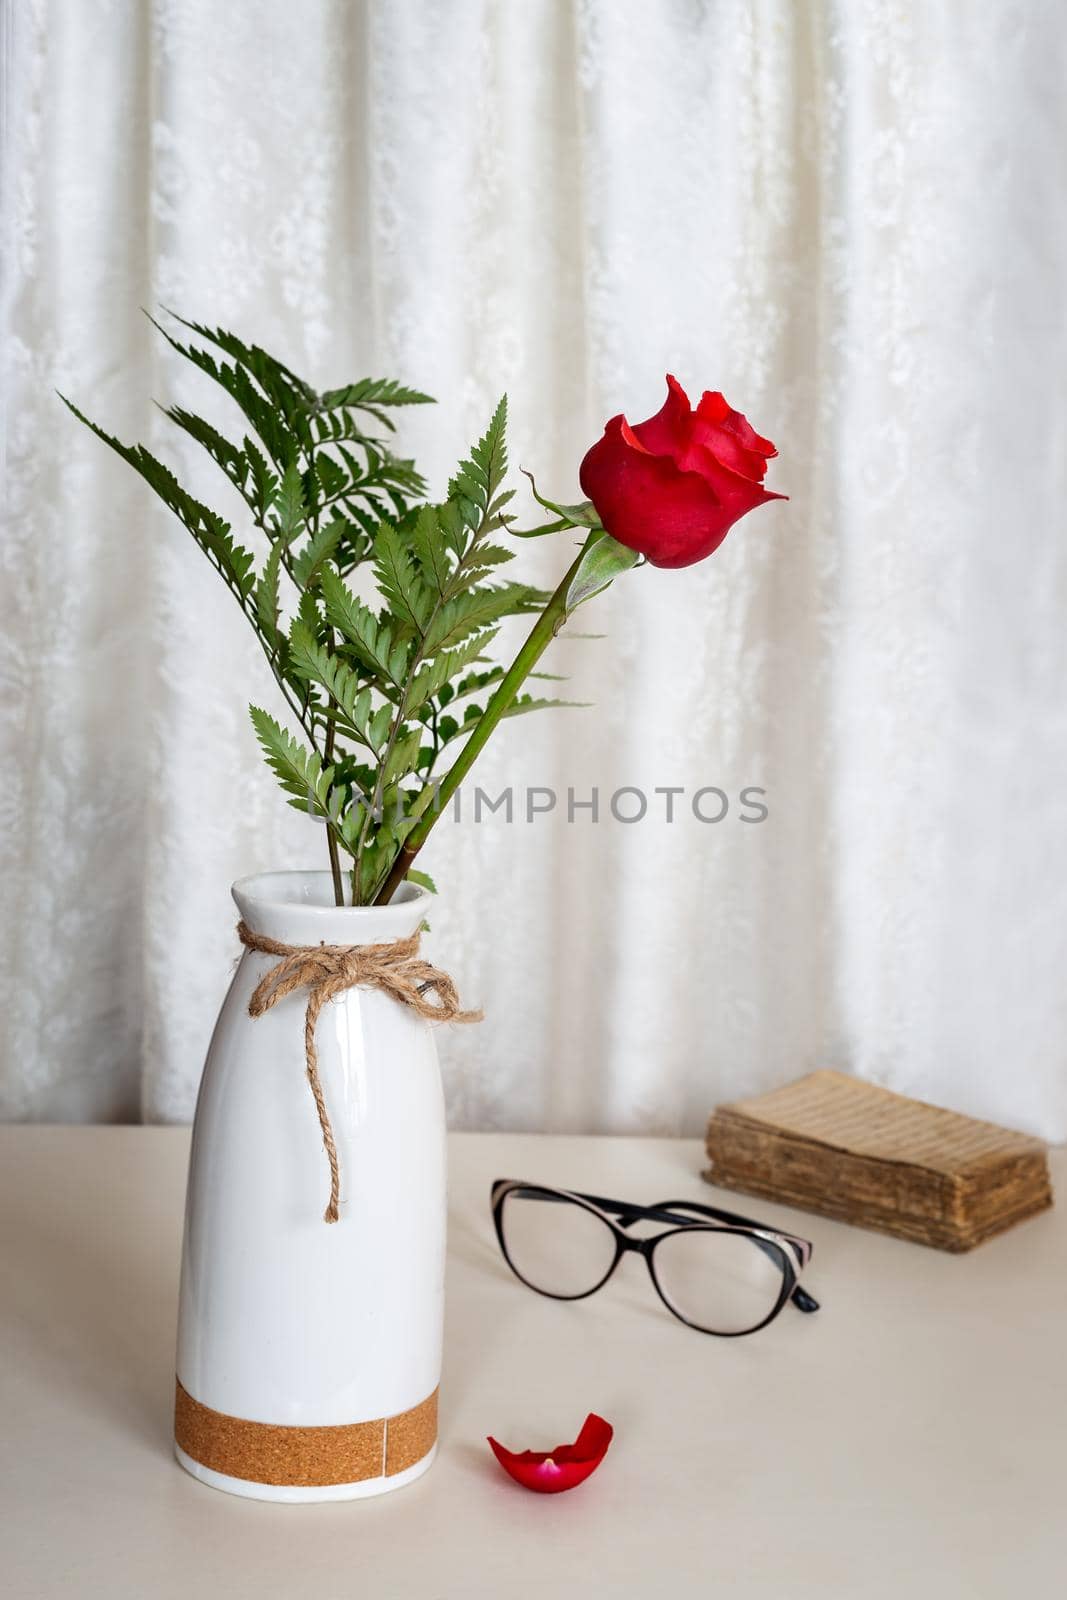 On the table in a white ceramic vase is a flower of a beautiful red rose. Next to an old book and glasses. Front view, copy space